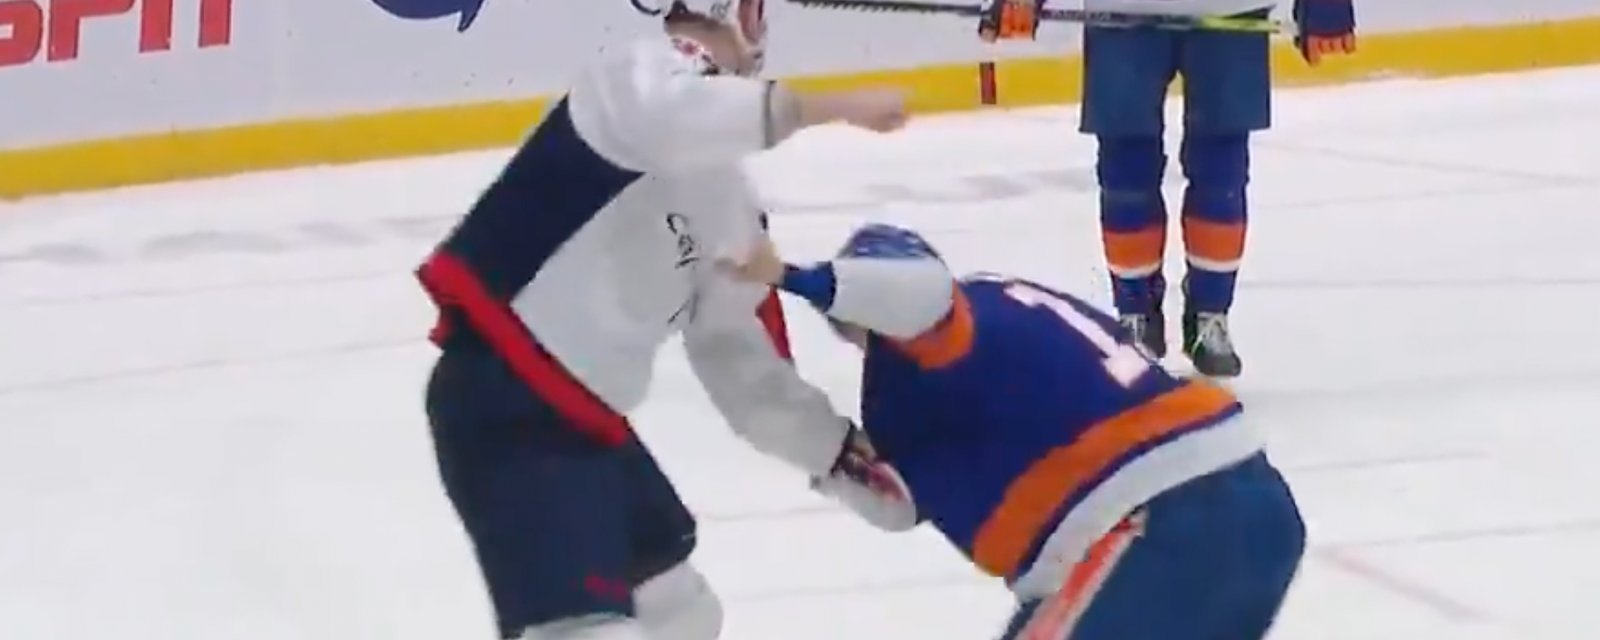 At 44 years old, Chara isn’t scared to drop the gloves and teach Martin a lesson! 